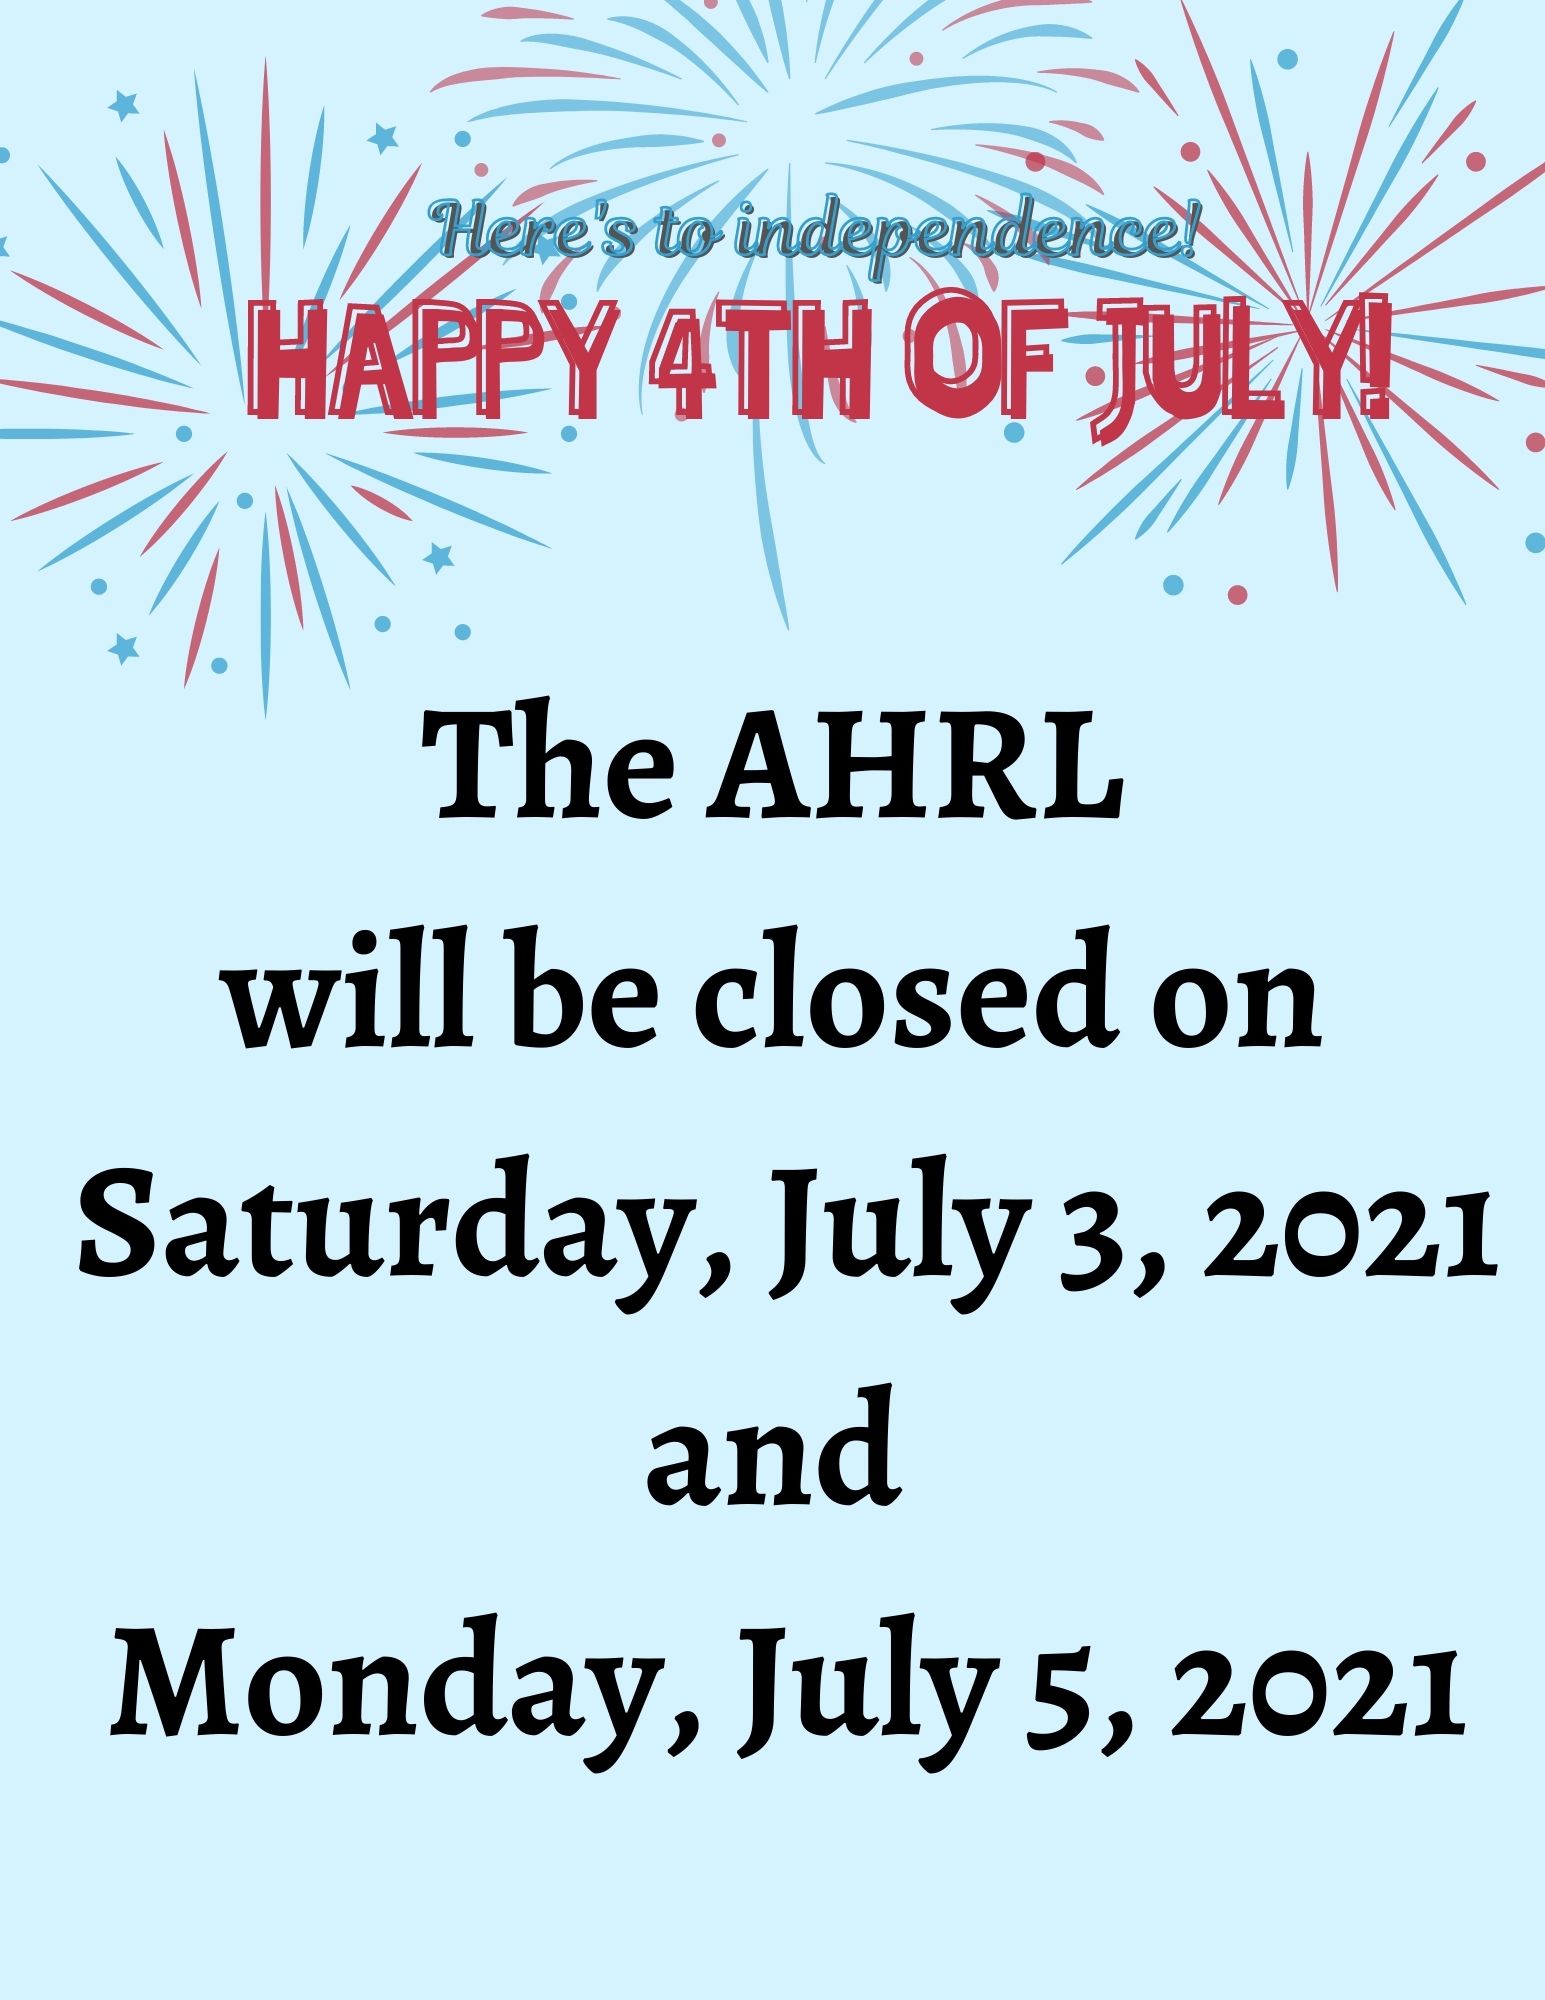 Closed for July 4th